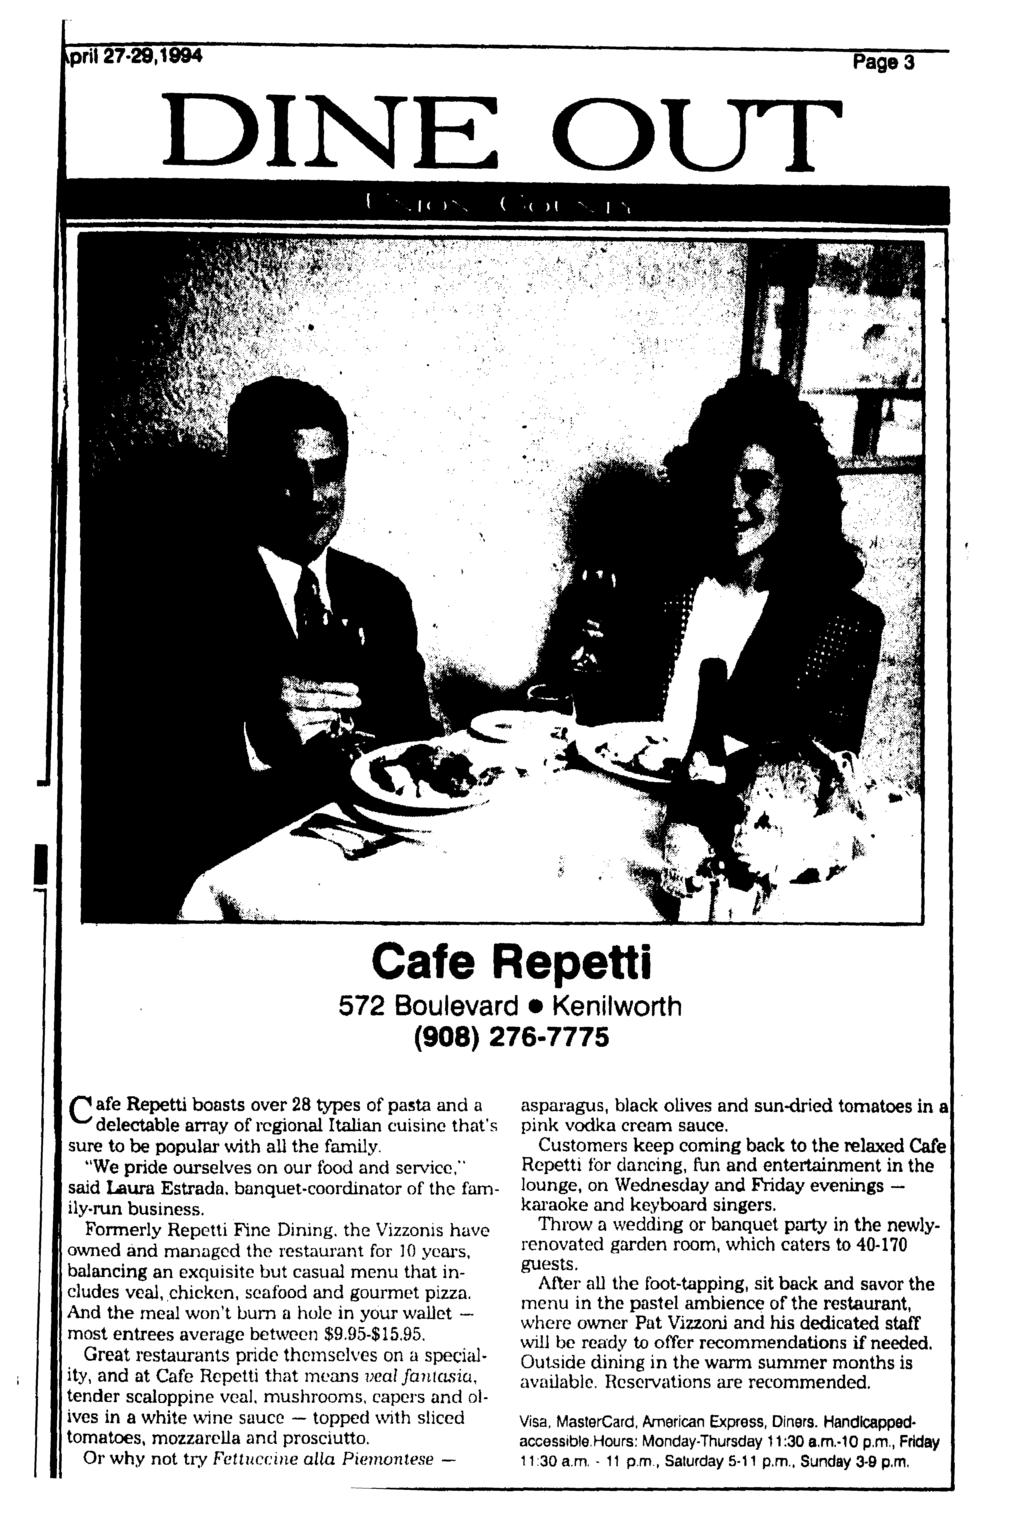 iprit 27-29,1994 DINE OUT Cafe Repetti 572 Boulevard Kenilworth (908) 276-7775 r* afe Repetti boasts over 28 types of pasta and a ^delectable array of regional Italian cuisine that's sure to be